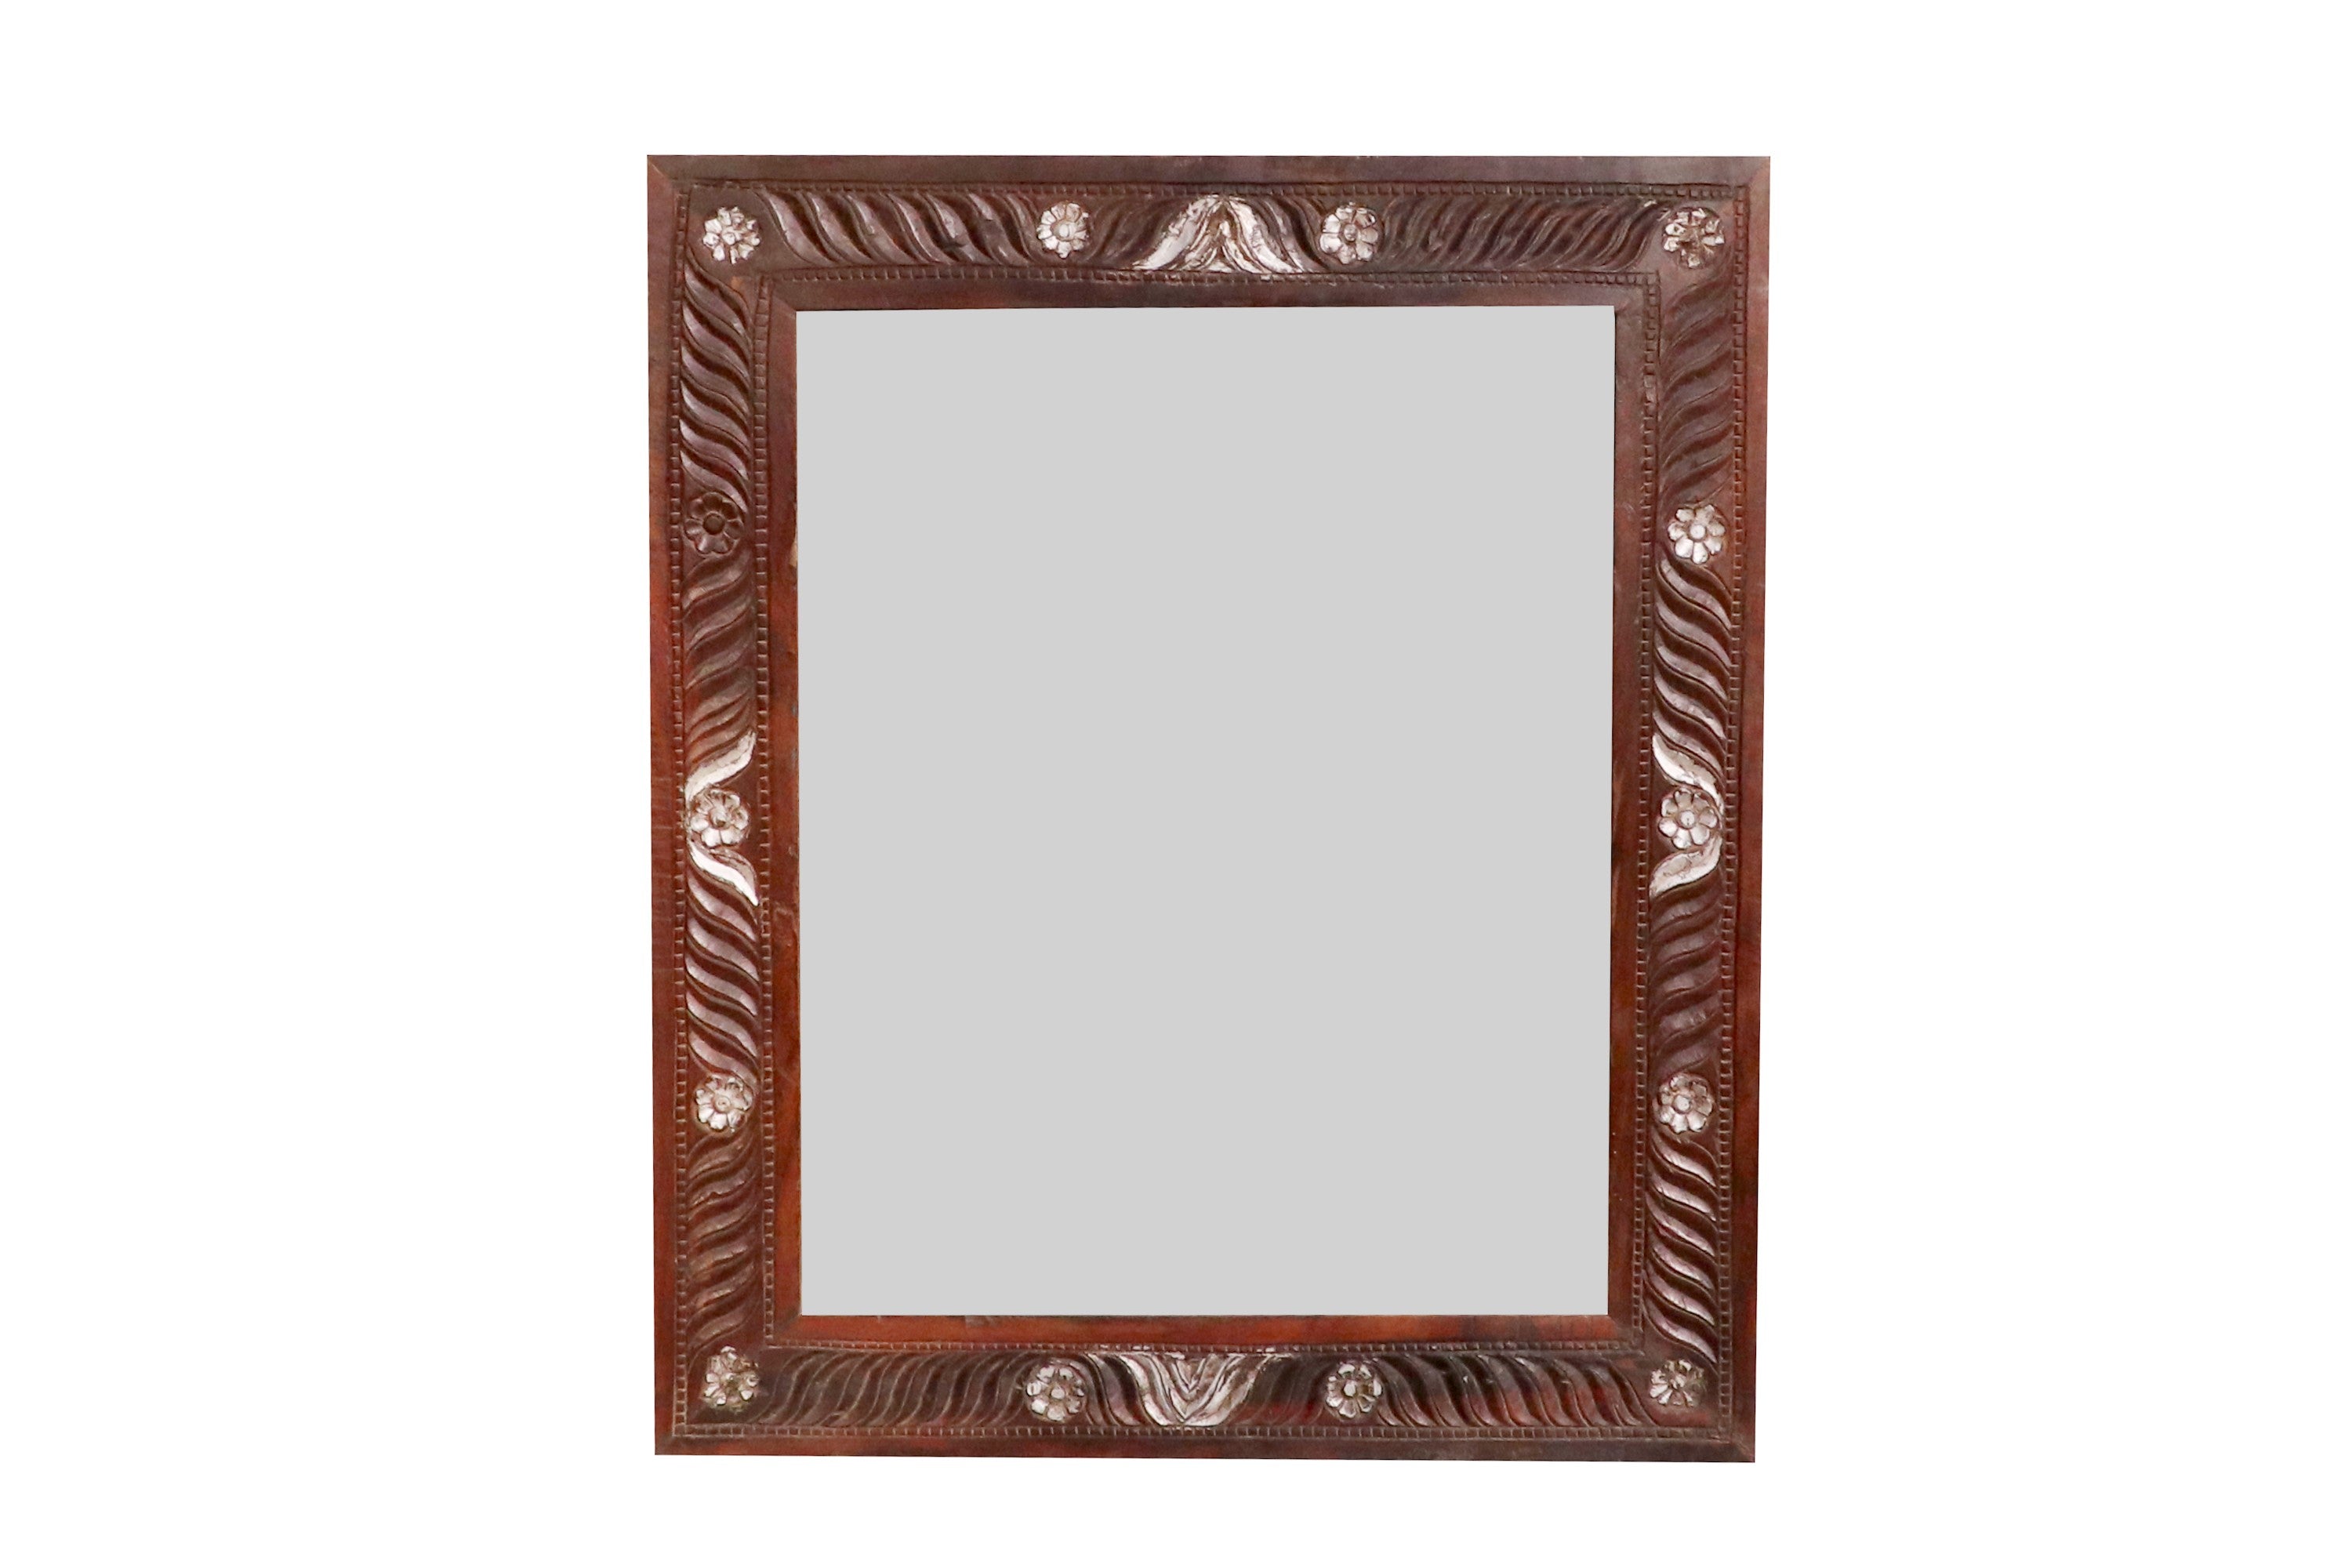 Crawling wood Solid mirror with 4 side white distressed petals Mirror